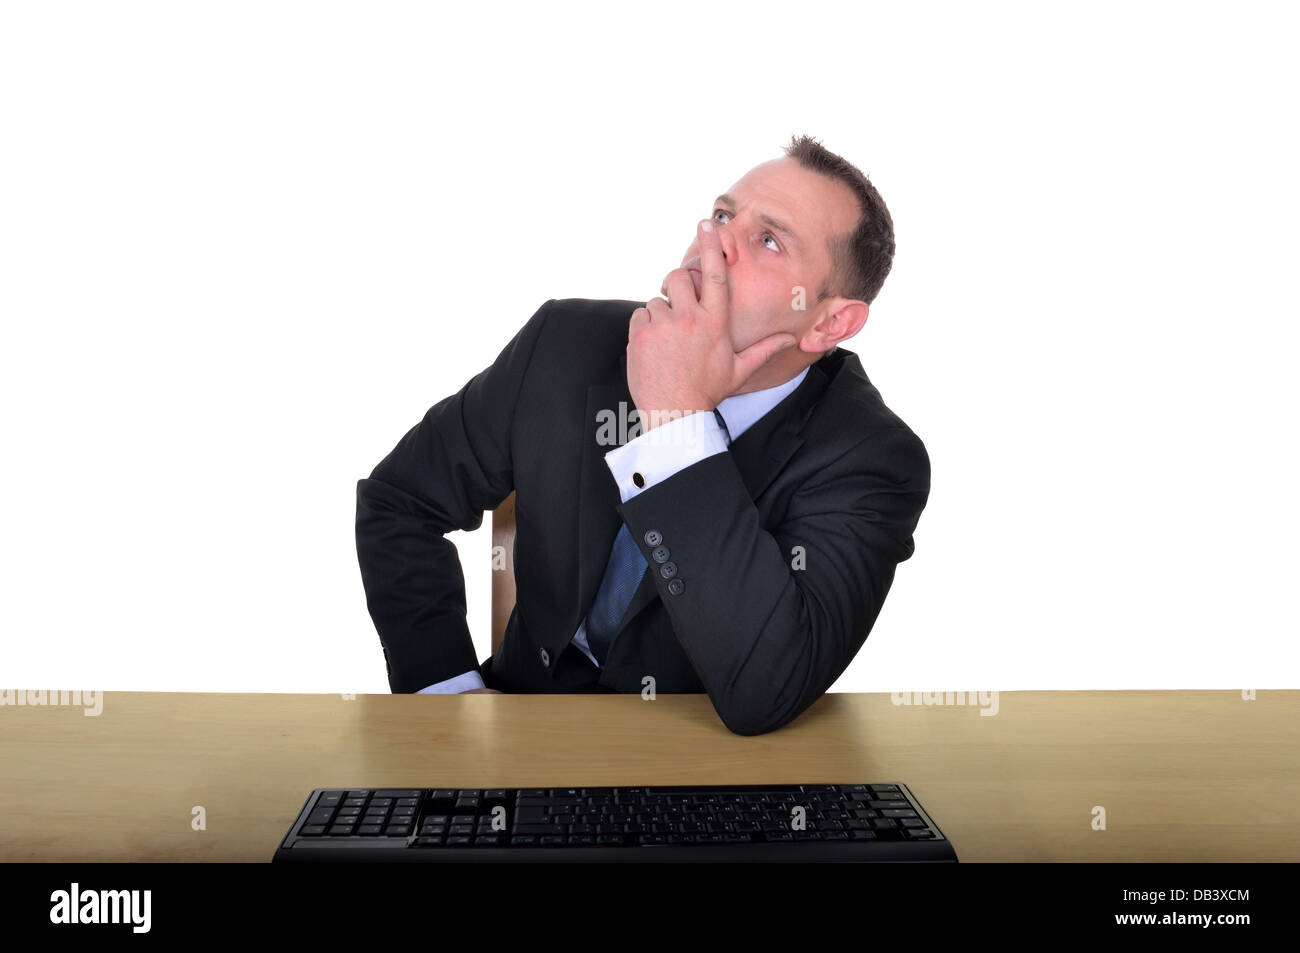 Image of a businessman sitting at a desk thinking. Stock Photo